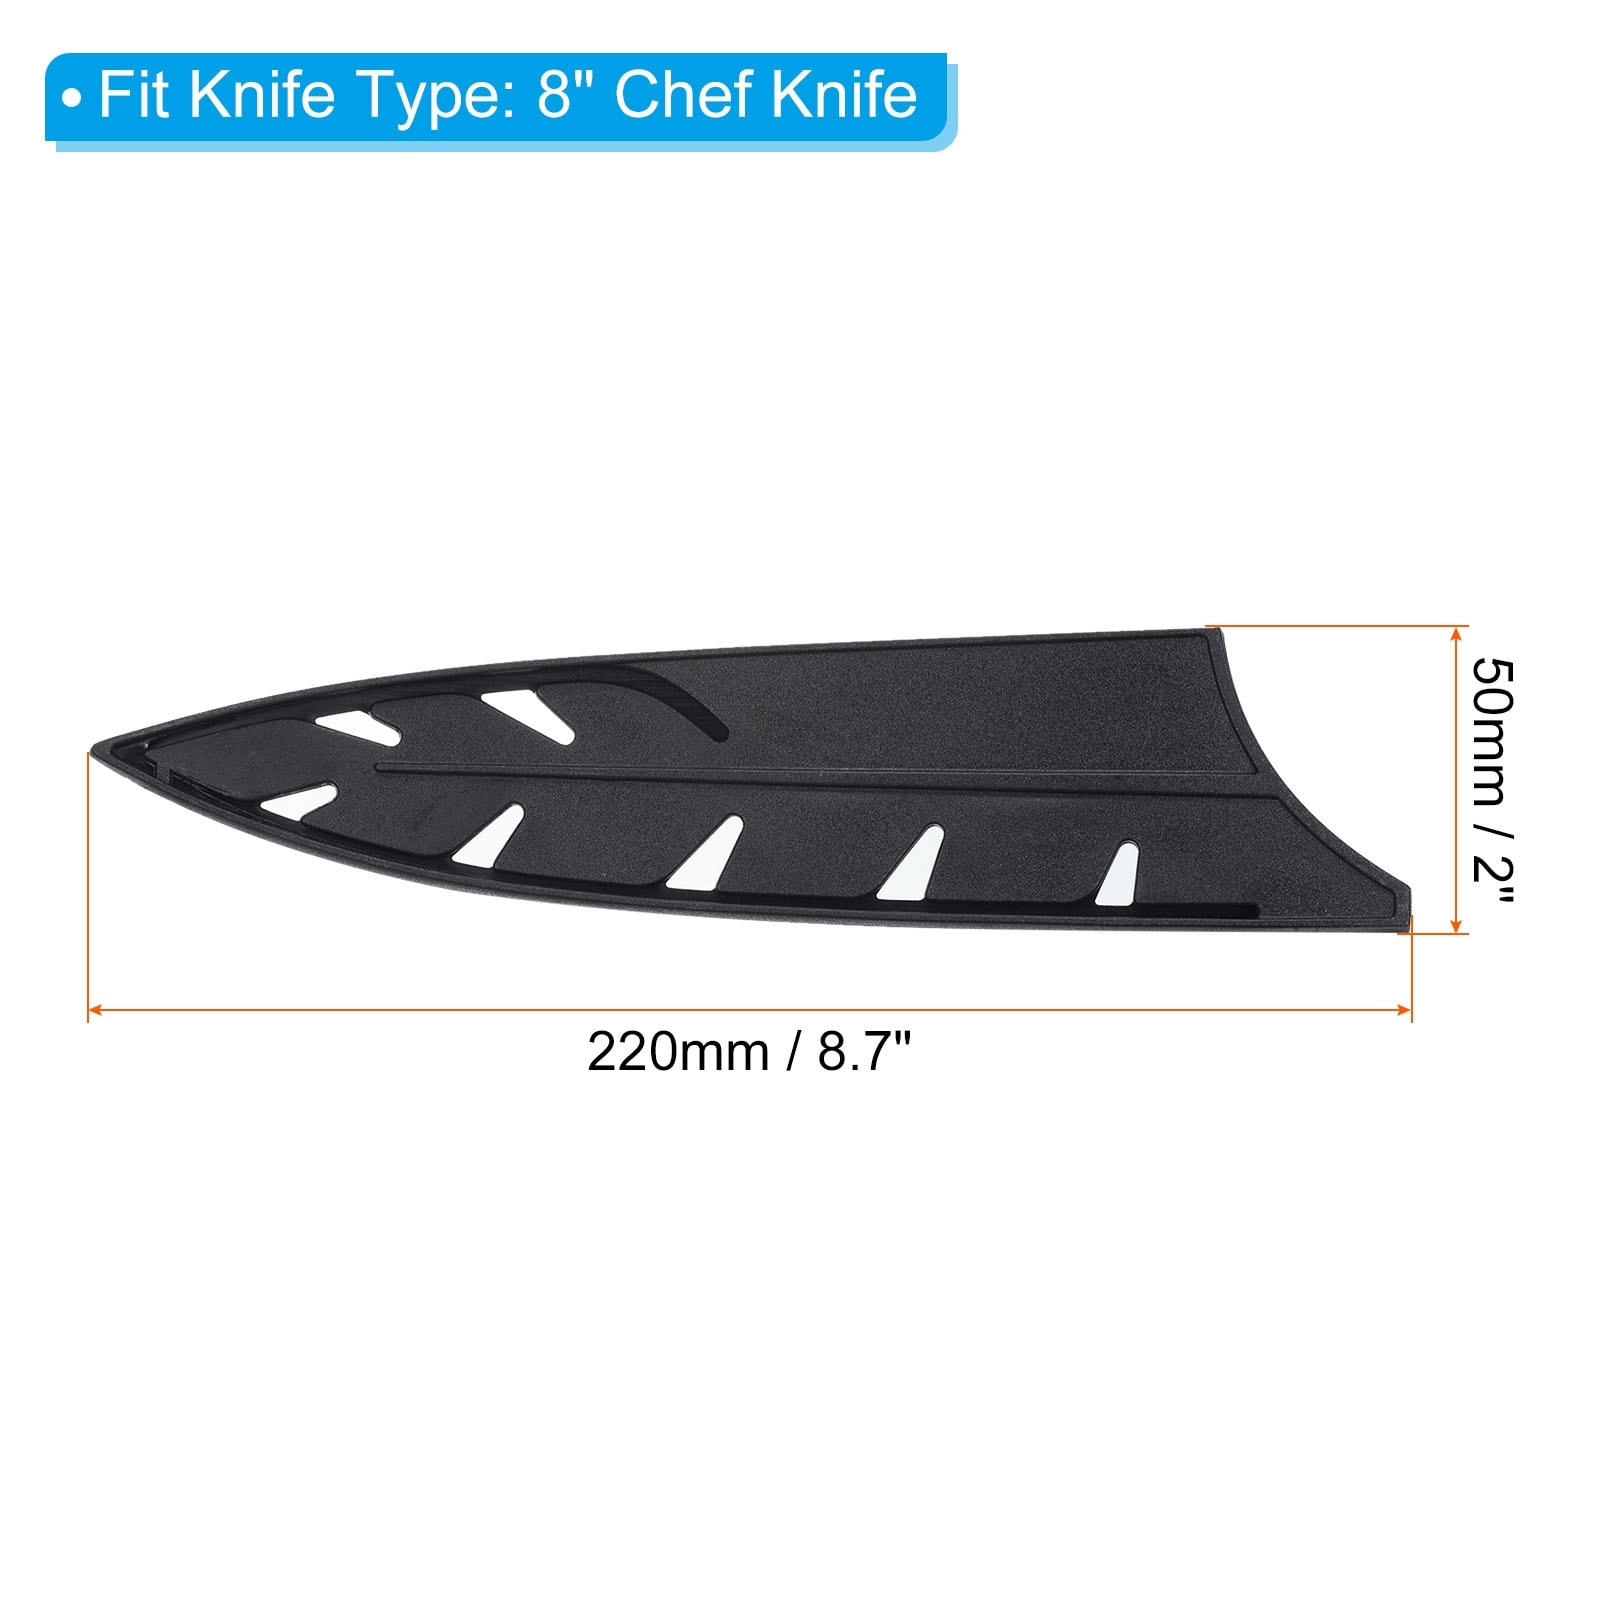 https://ak1.ostkcdn.com/images/products/is/images/direct/a58fe48846218c715caf60a71030005788fc0f37/Plastic-Kitchen-Knife-Sheath-Cover-Sleeves-for-8%22-Chef-Knife%2C-Black.jpg